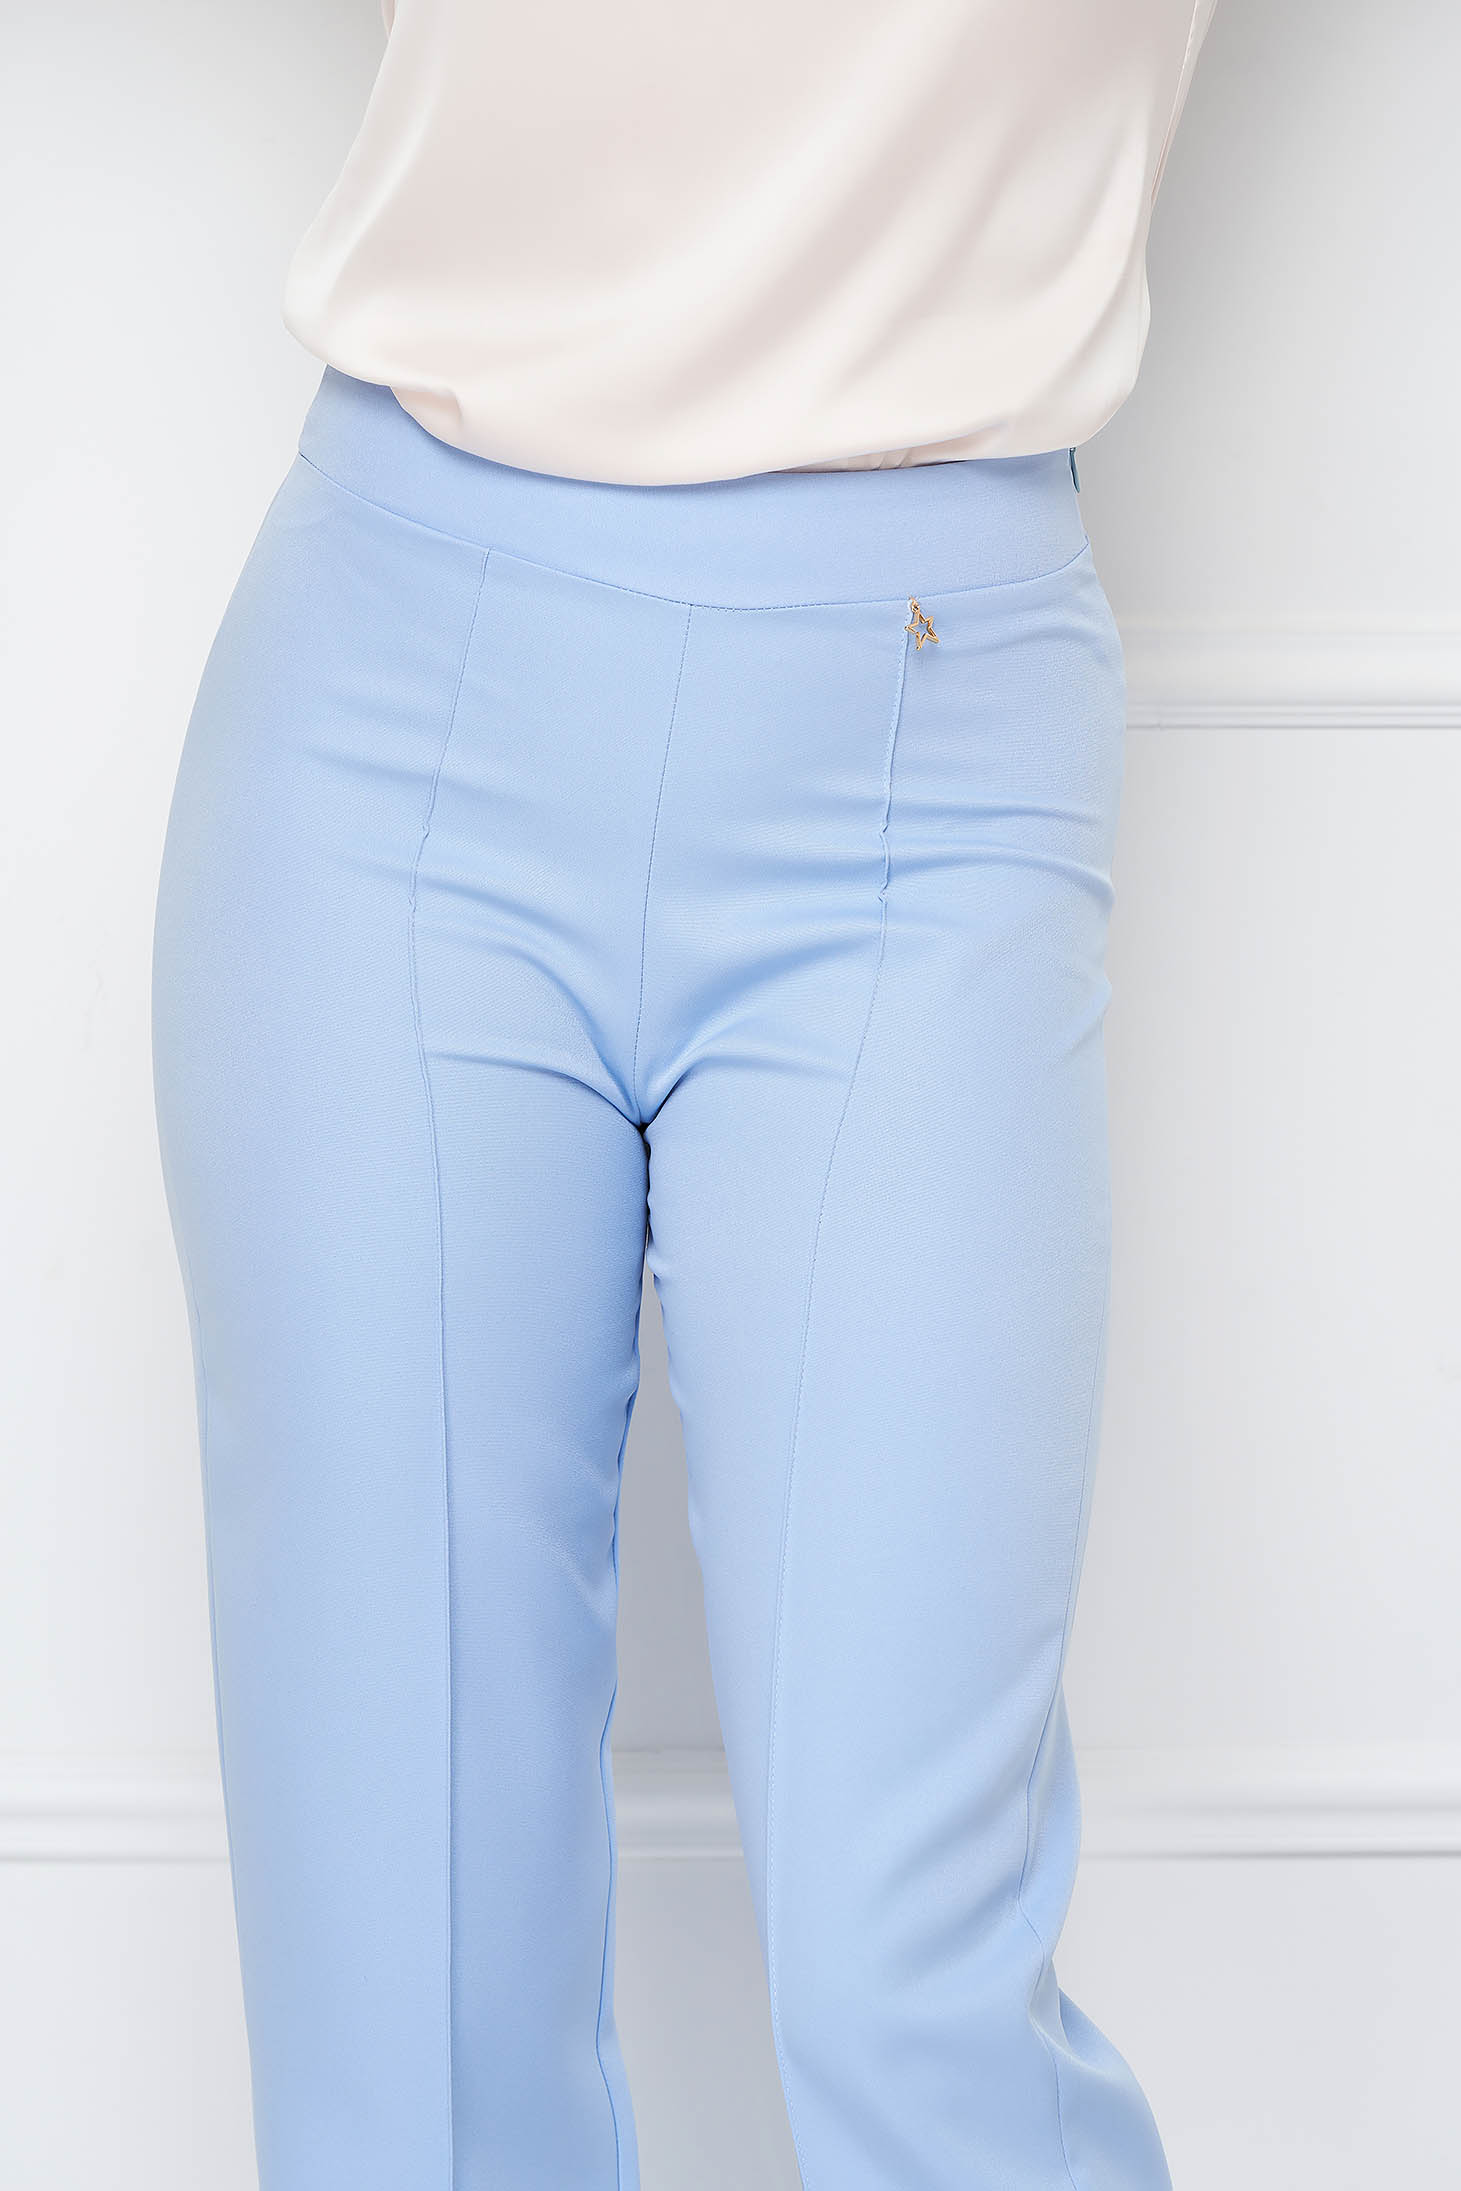 Light Blue High Waisted Flared Long Trousers made of Slightly Stretchy Fabric - StarShinerS 4 - StarShinerS.com